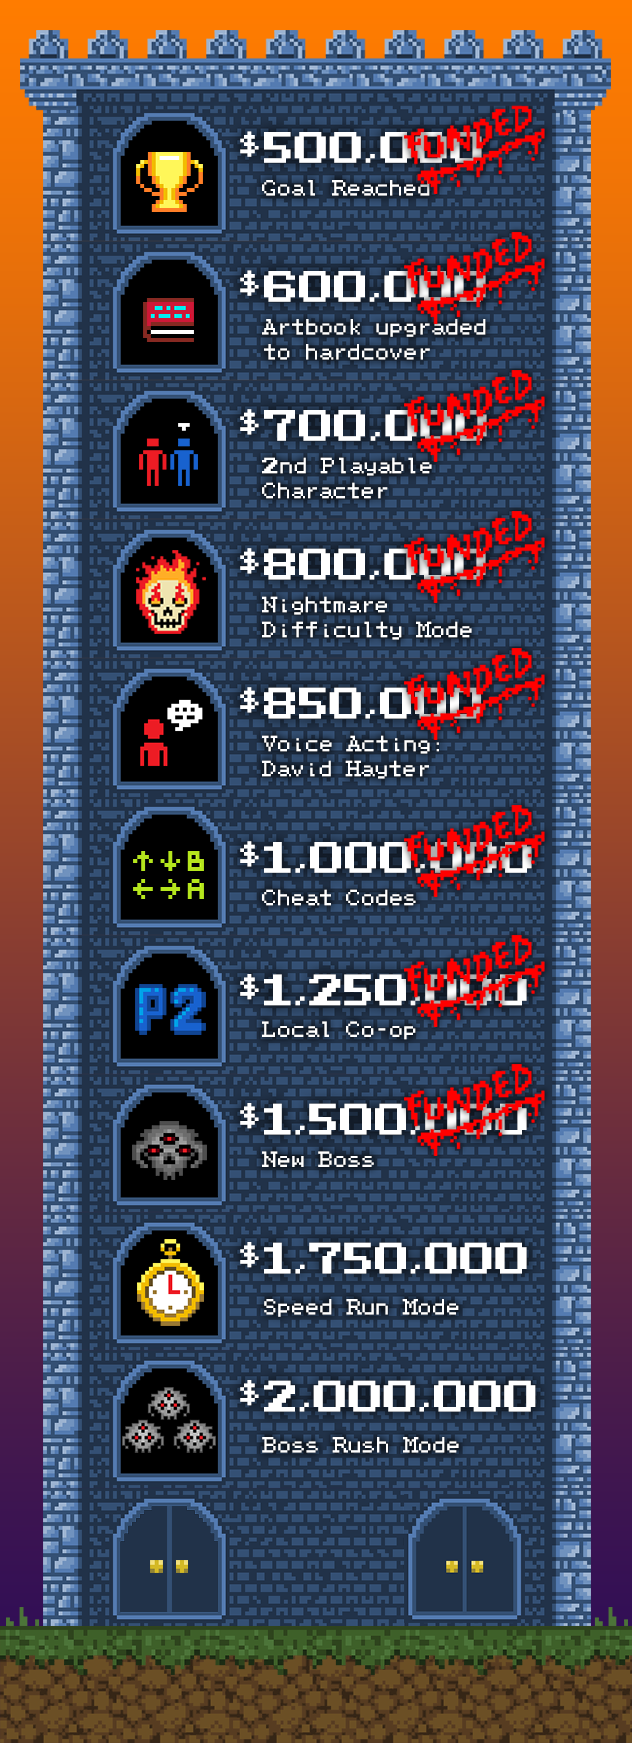 Bloodstained Ritual of the Night stretch goals ter